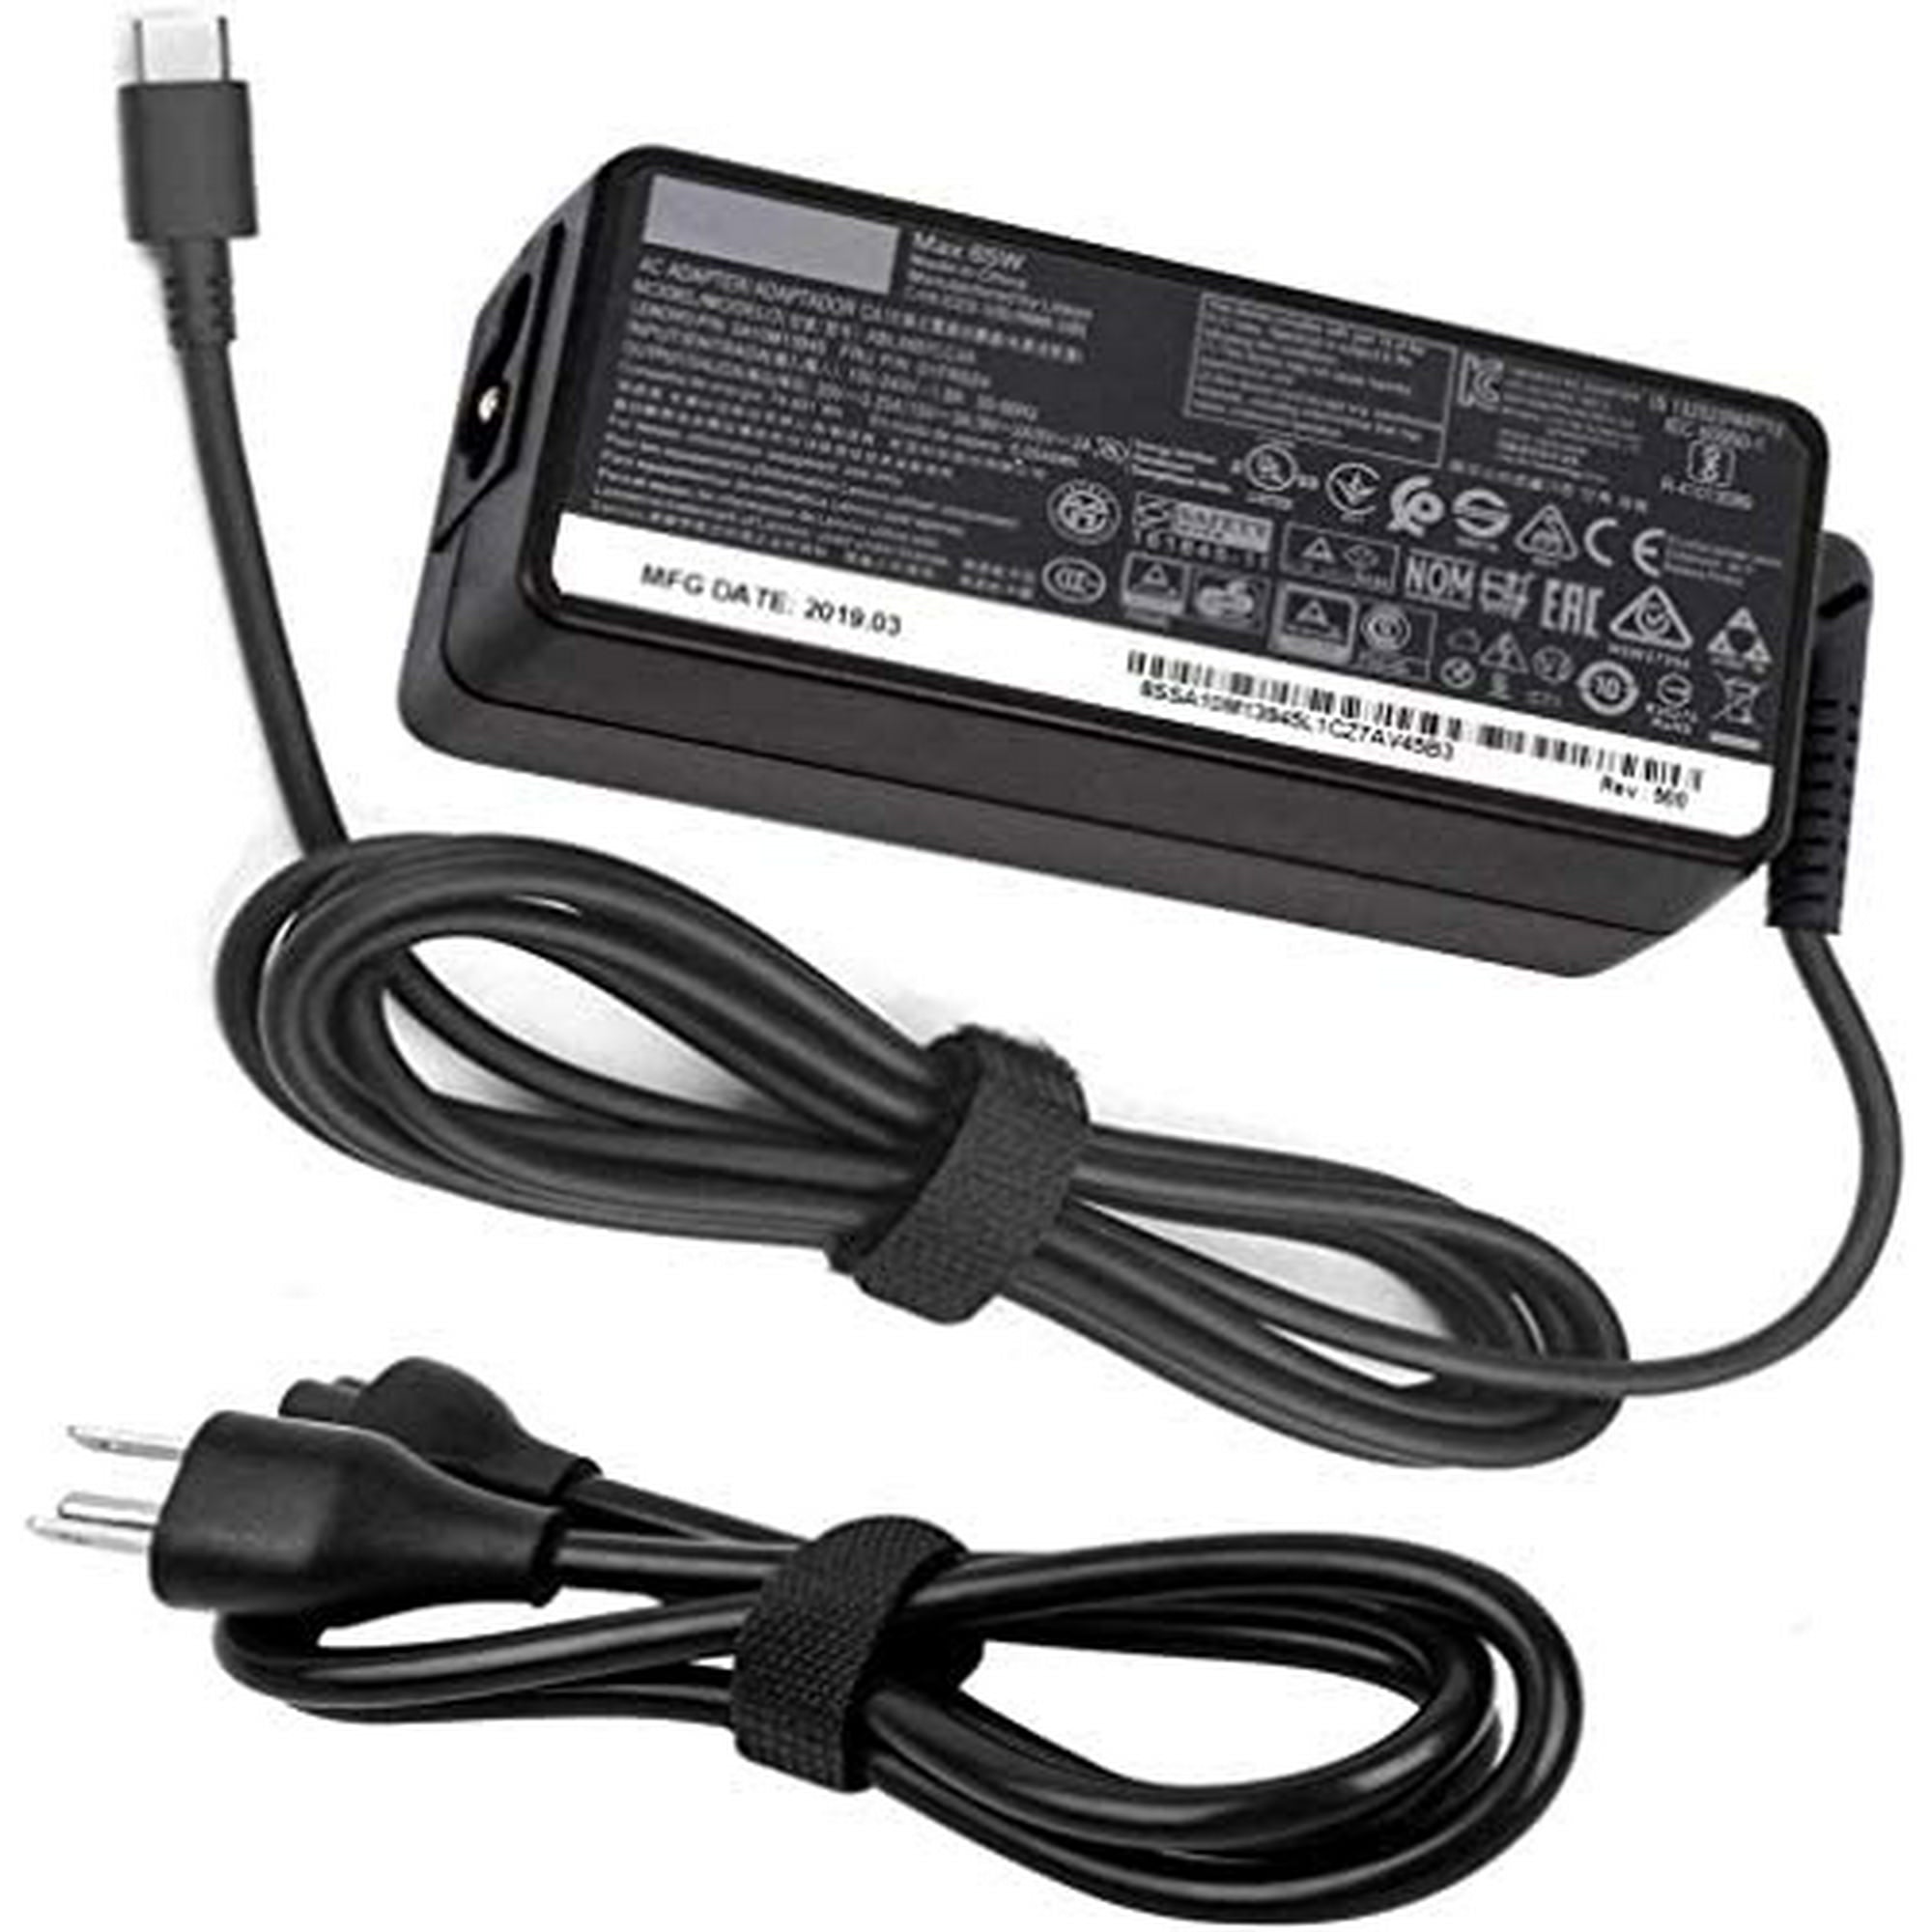 New 65W USB C Charger for Lenovo, Type C Laptop Power Adapter Supply, for  Lenovo Yoga C930, S730, 920, 730, ThinkPad X1 | Walmart Canada